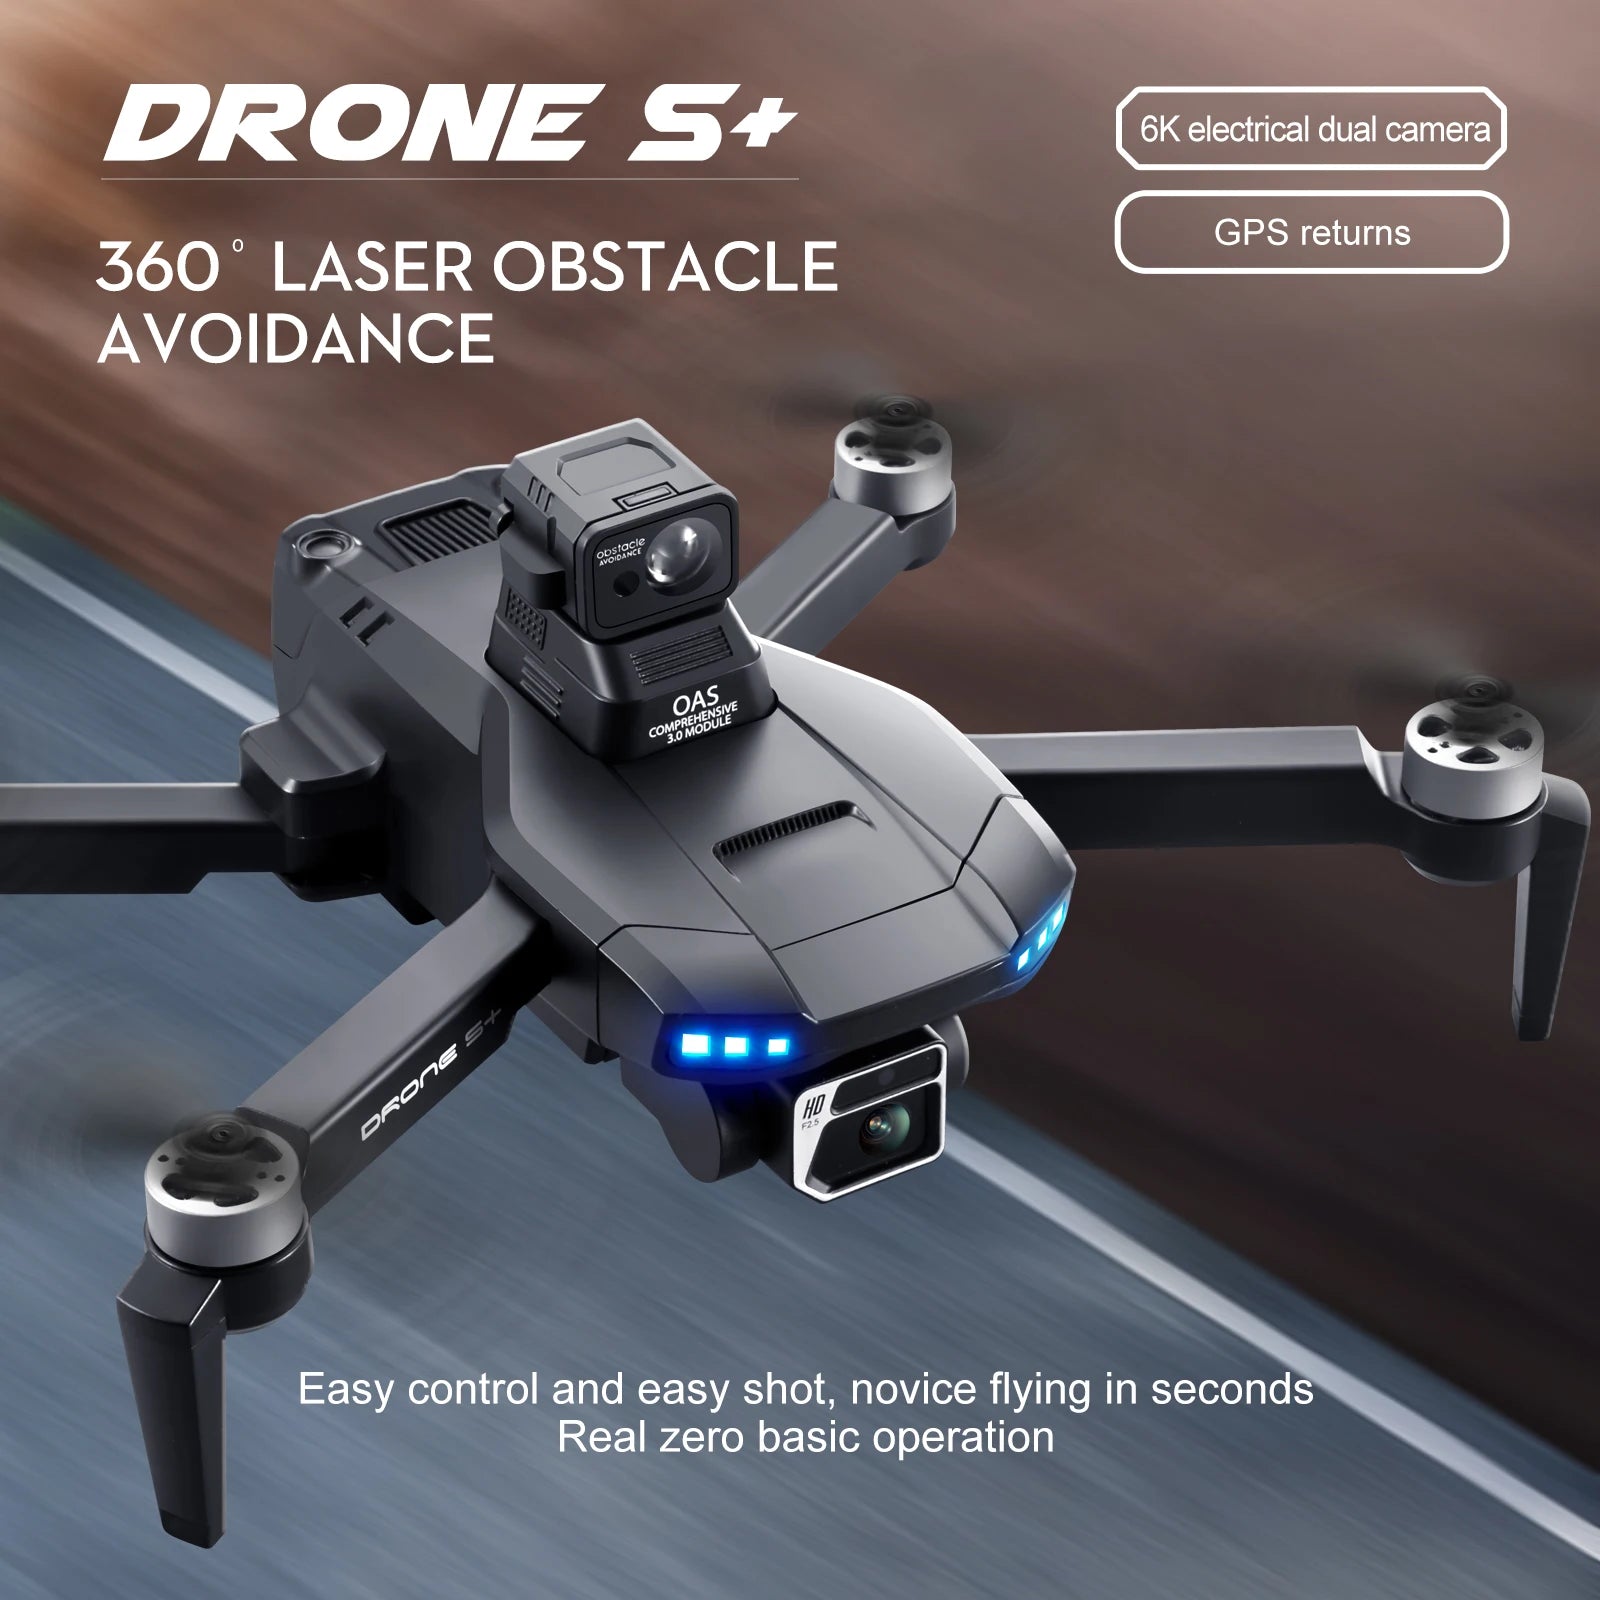 S+ Drone, DRONE 5* 6K electrical dual camera GPS returns 360 LASER OBSTACLE